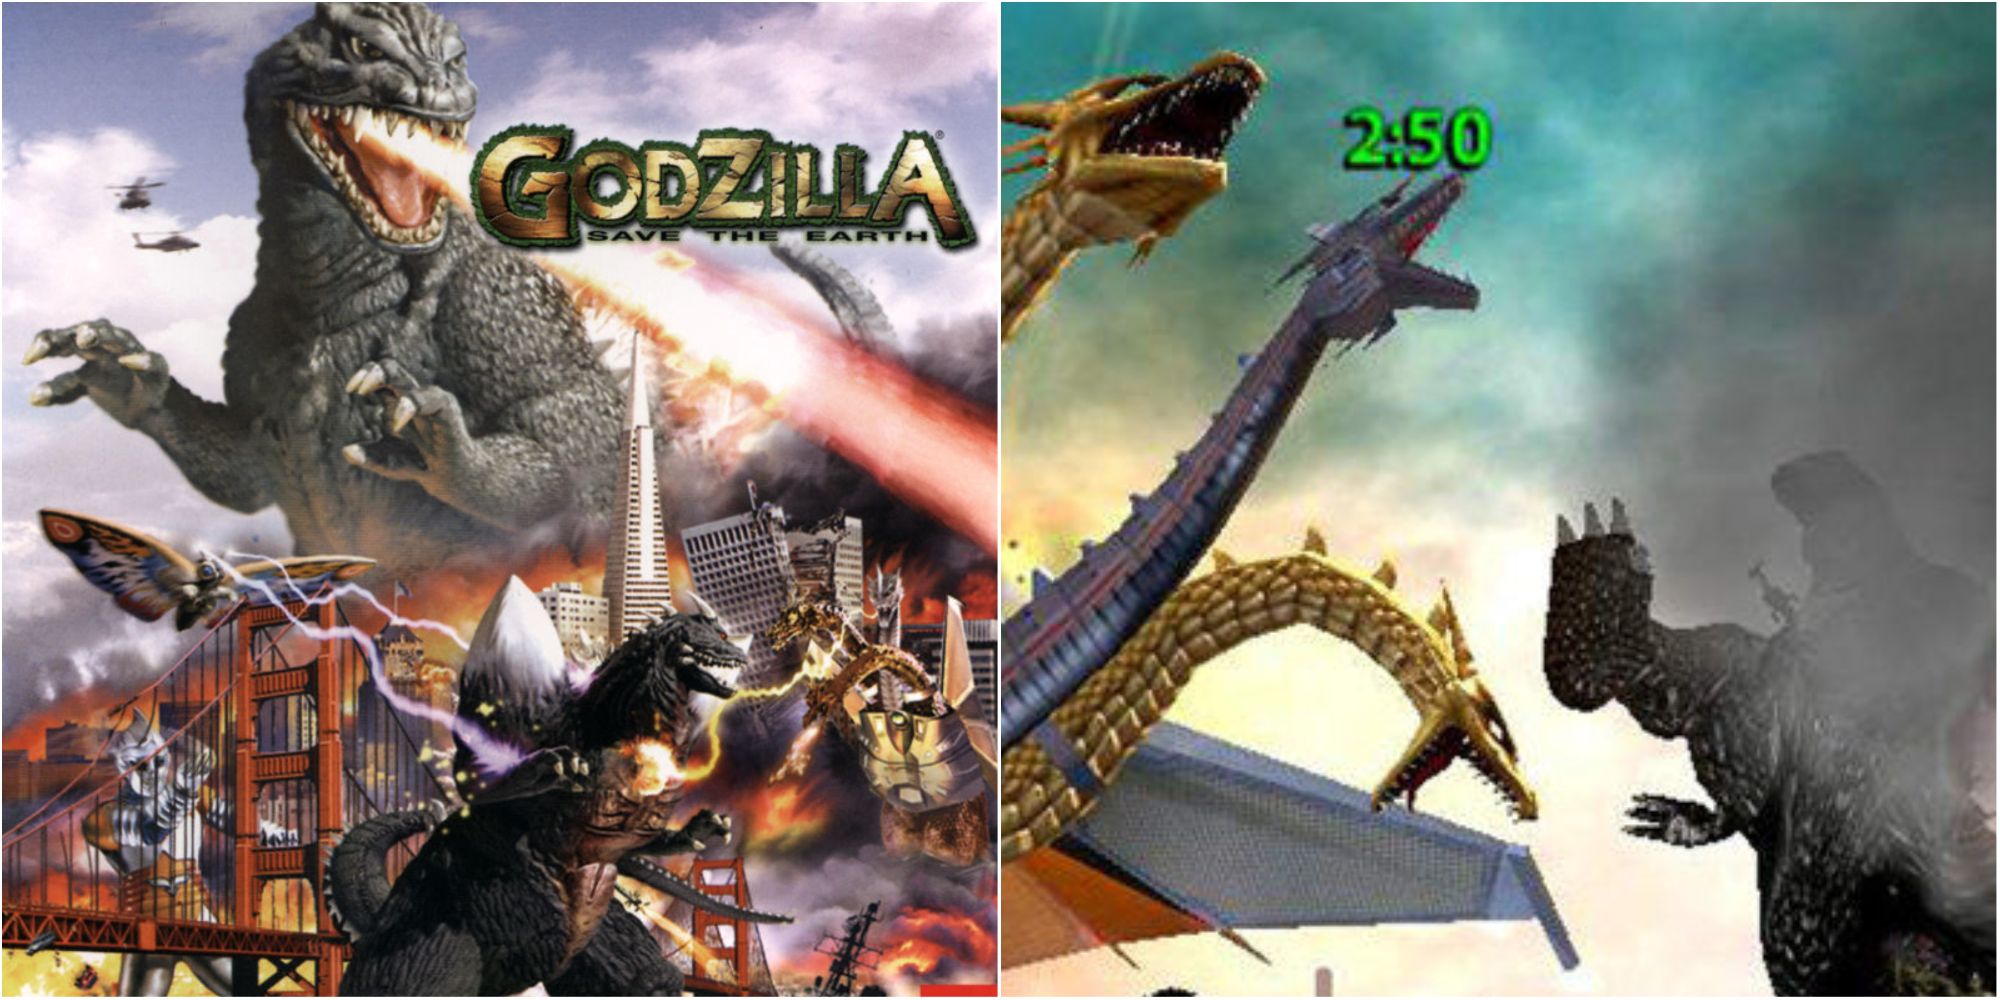 godzila save the earth cover art and gameplay